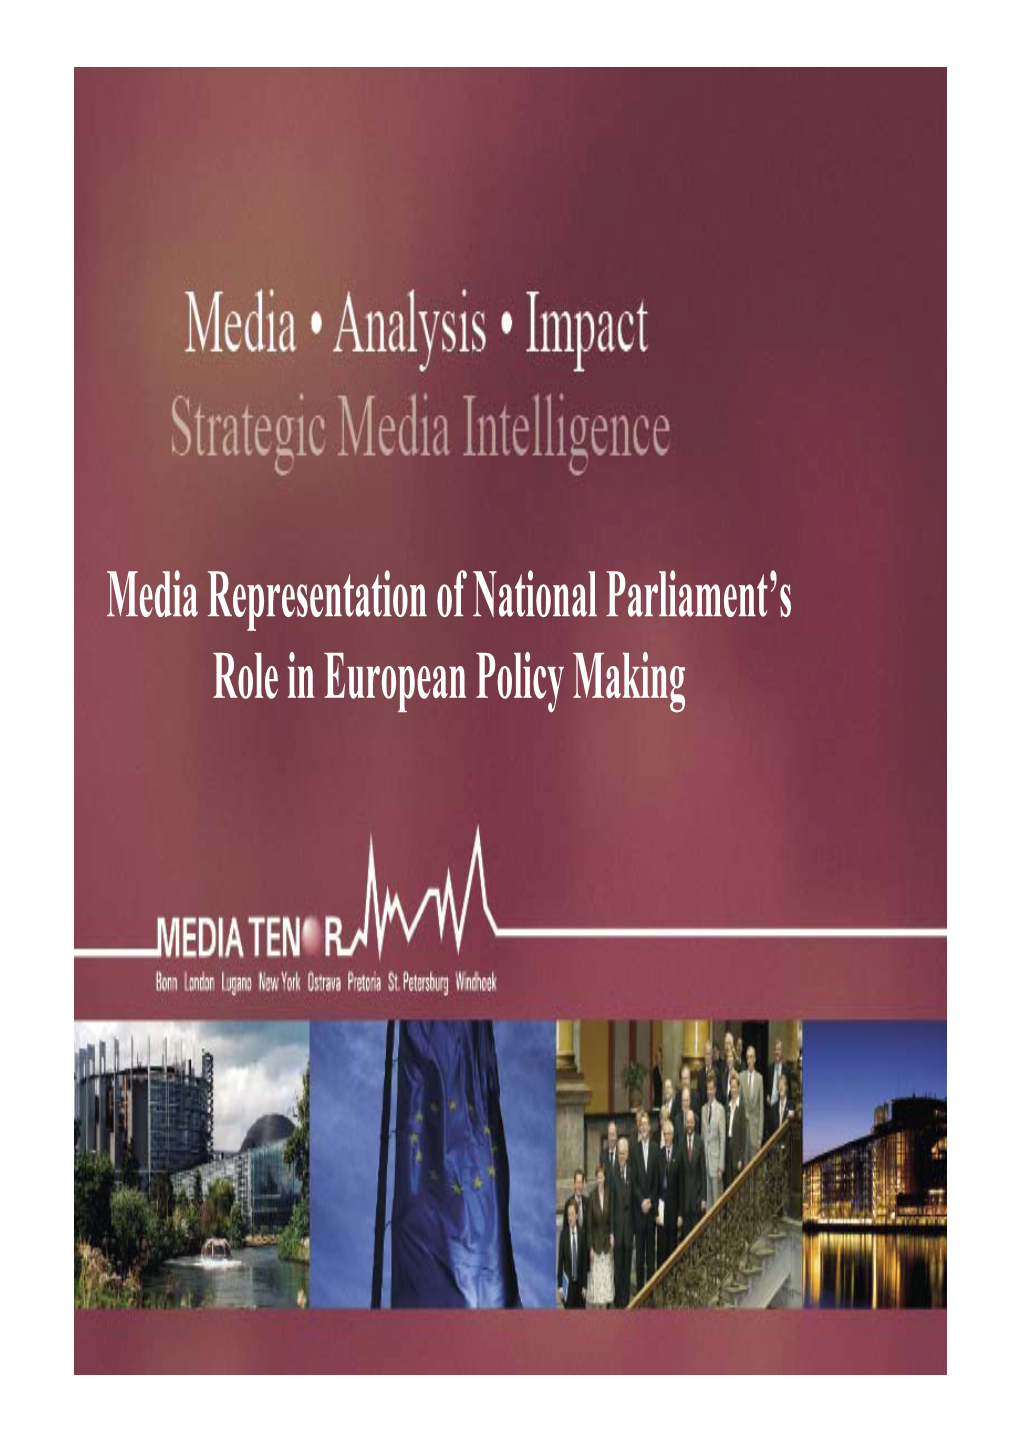 Media Representation of National Parliament's Role in European